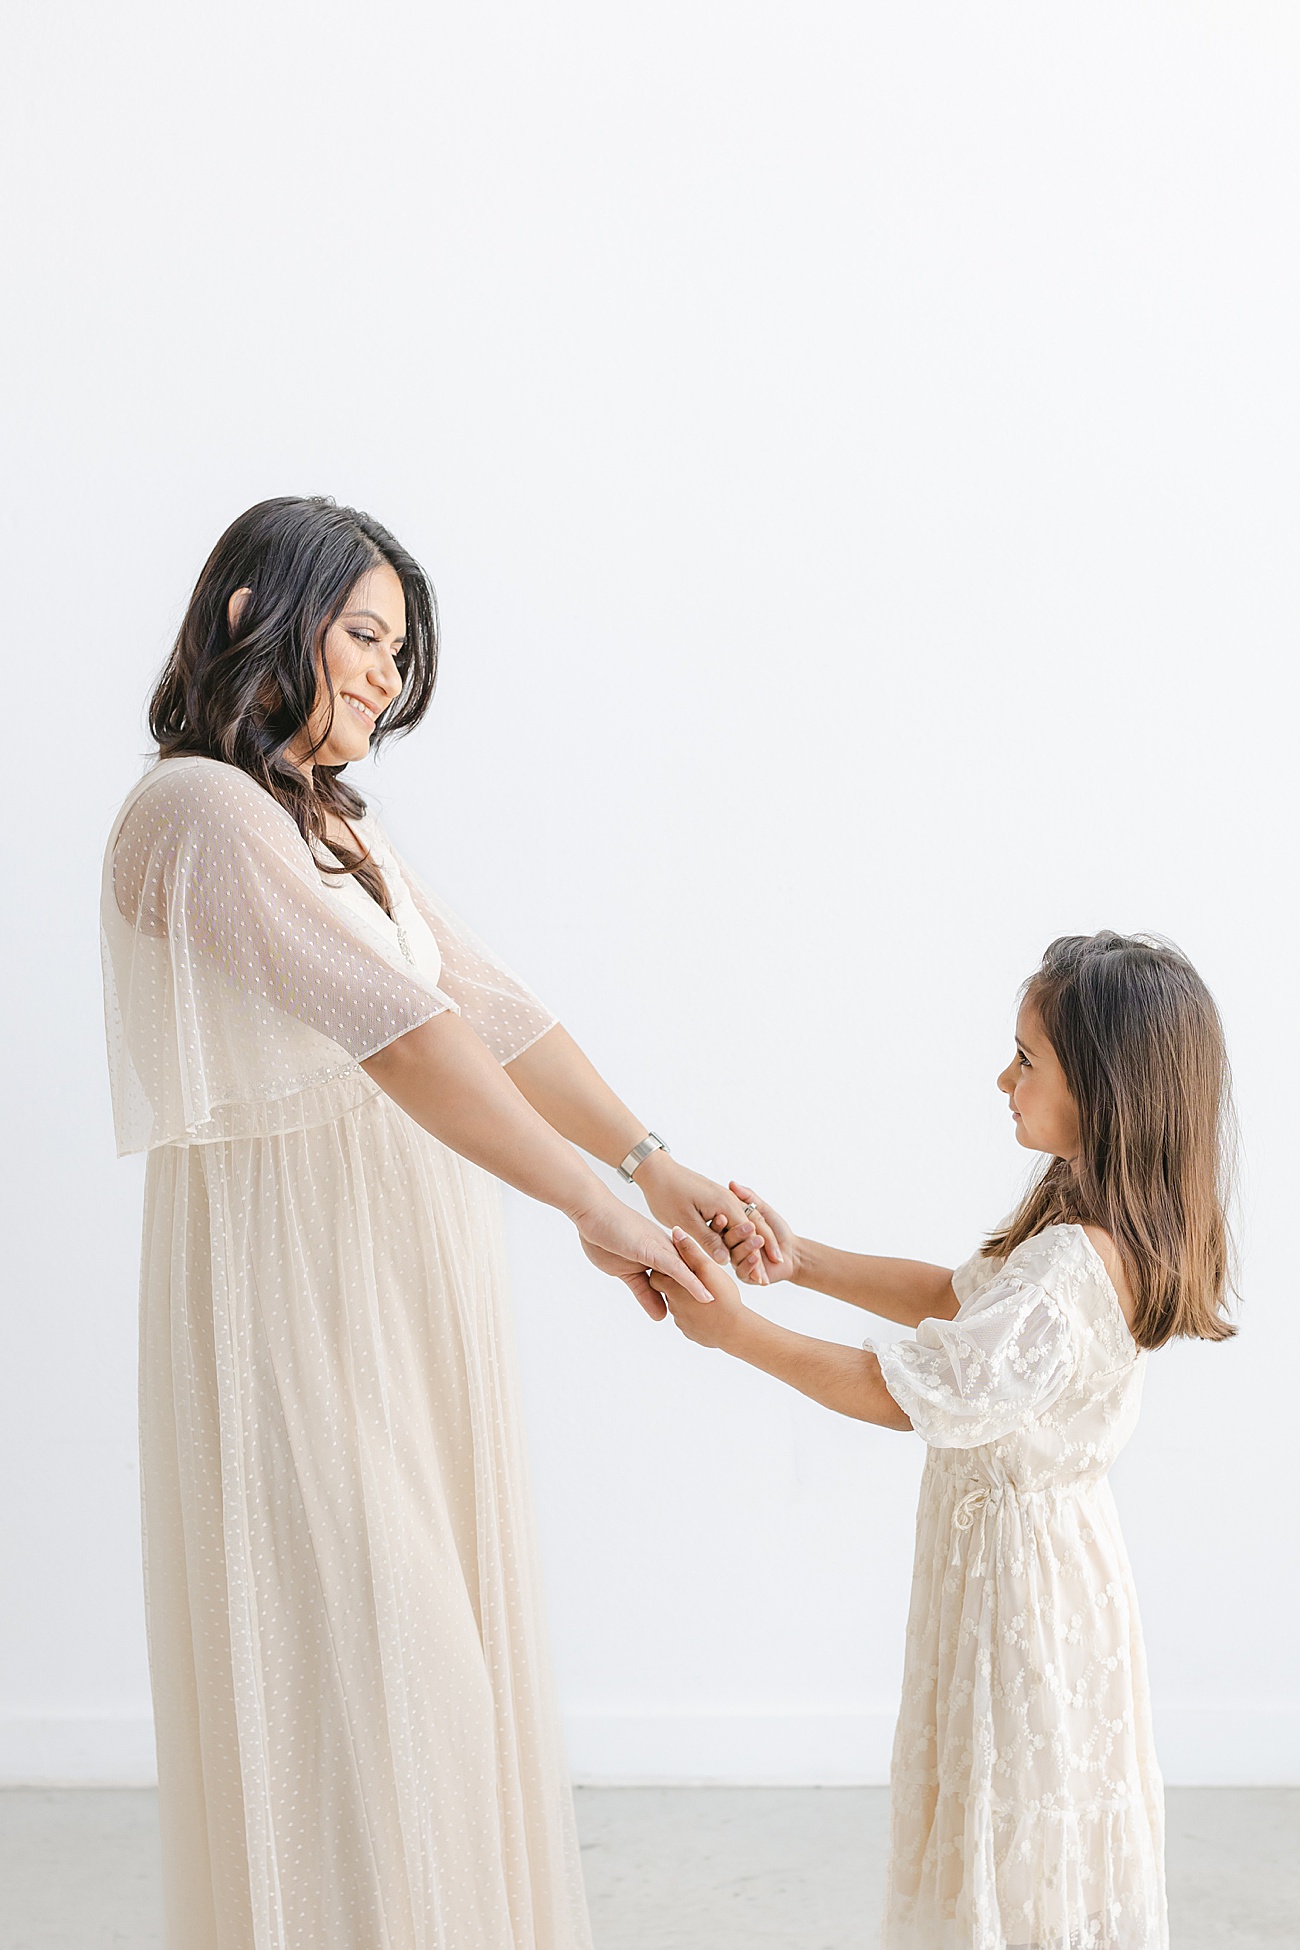 Sweet candid of Mom and daughter dancing in the studio. Photo by Sana Ahmed Photography.